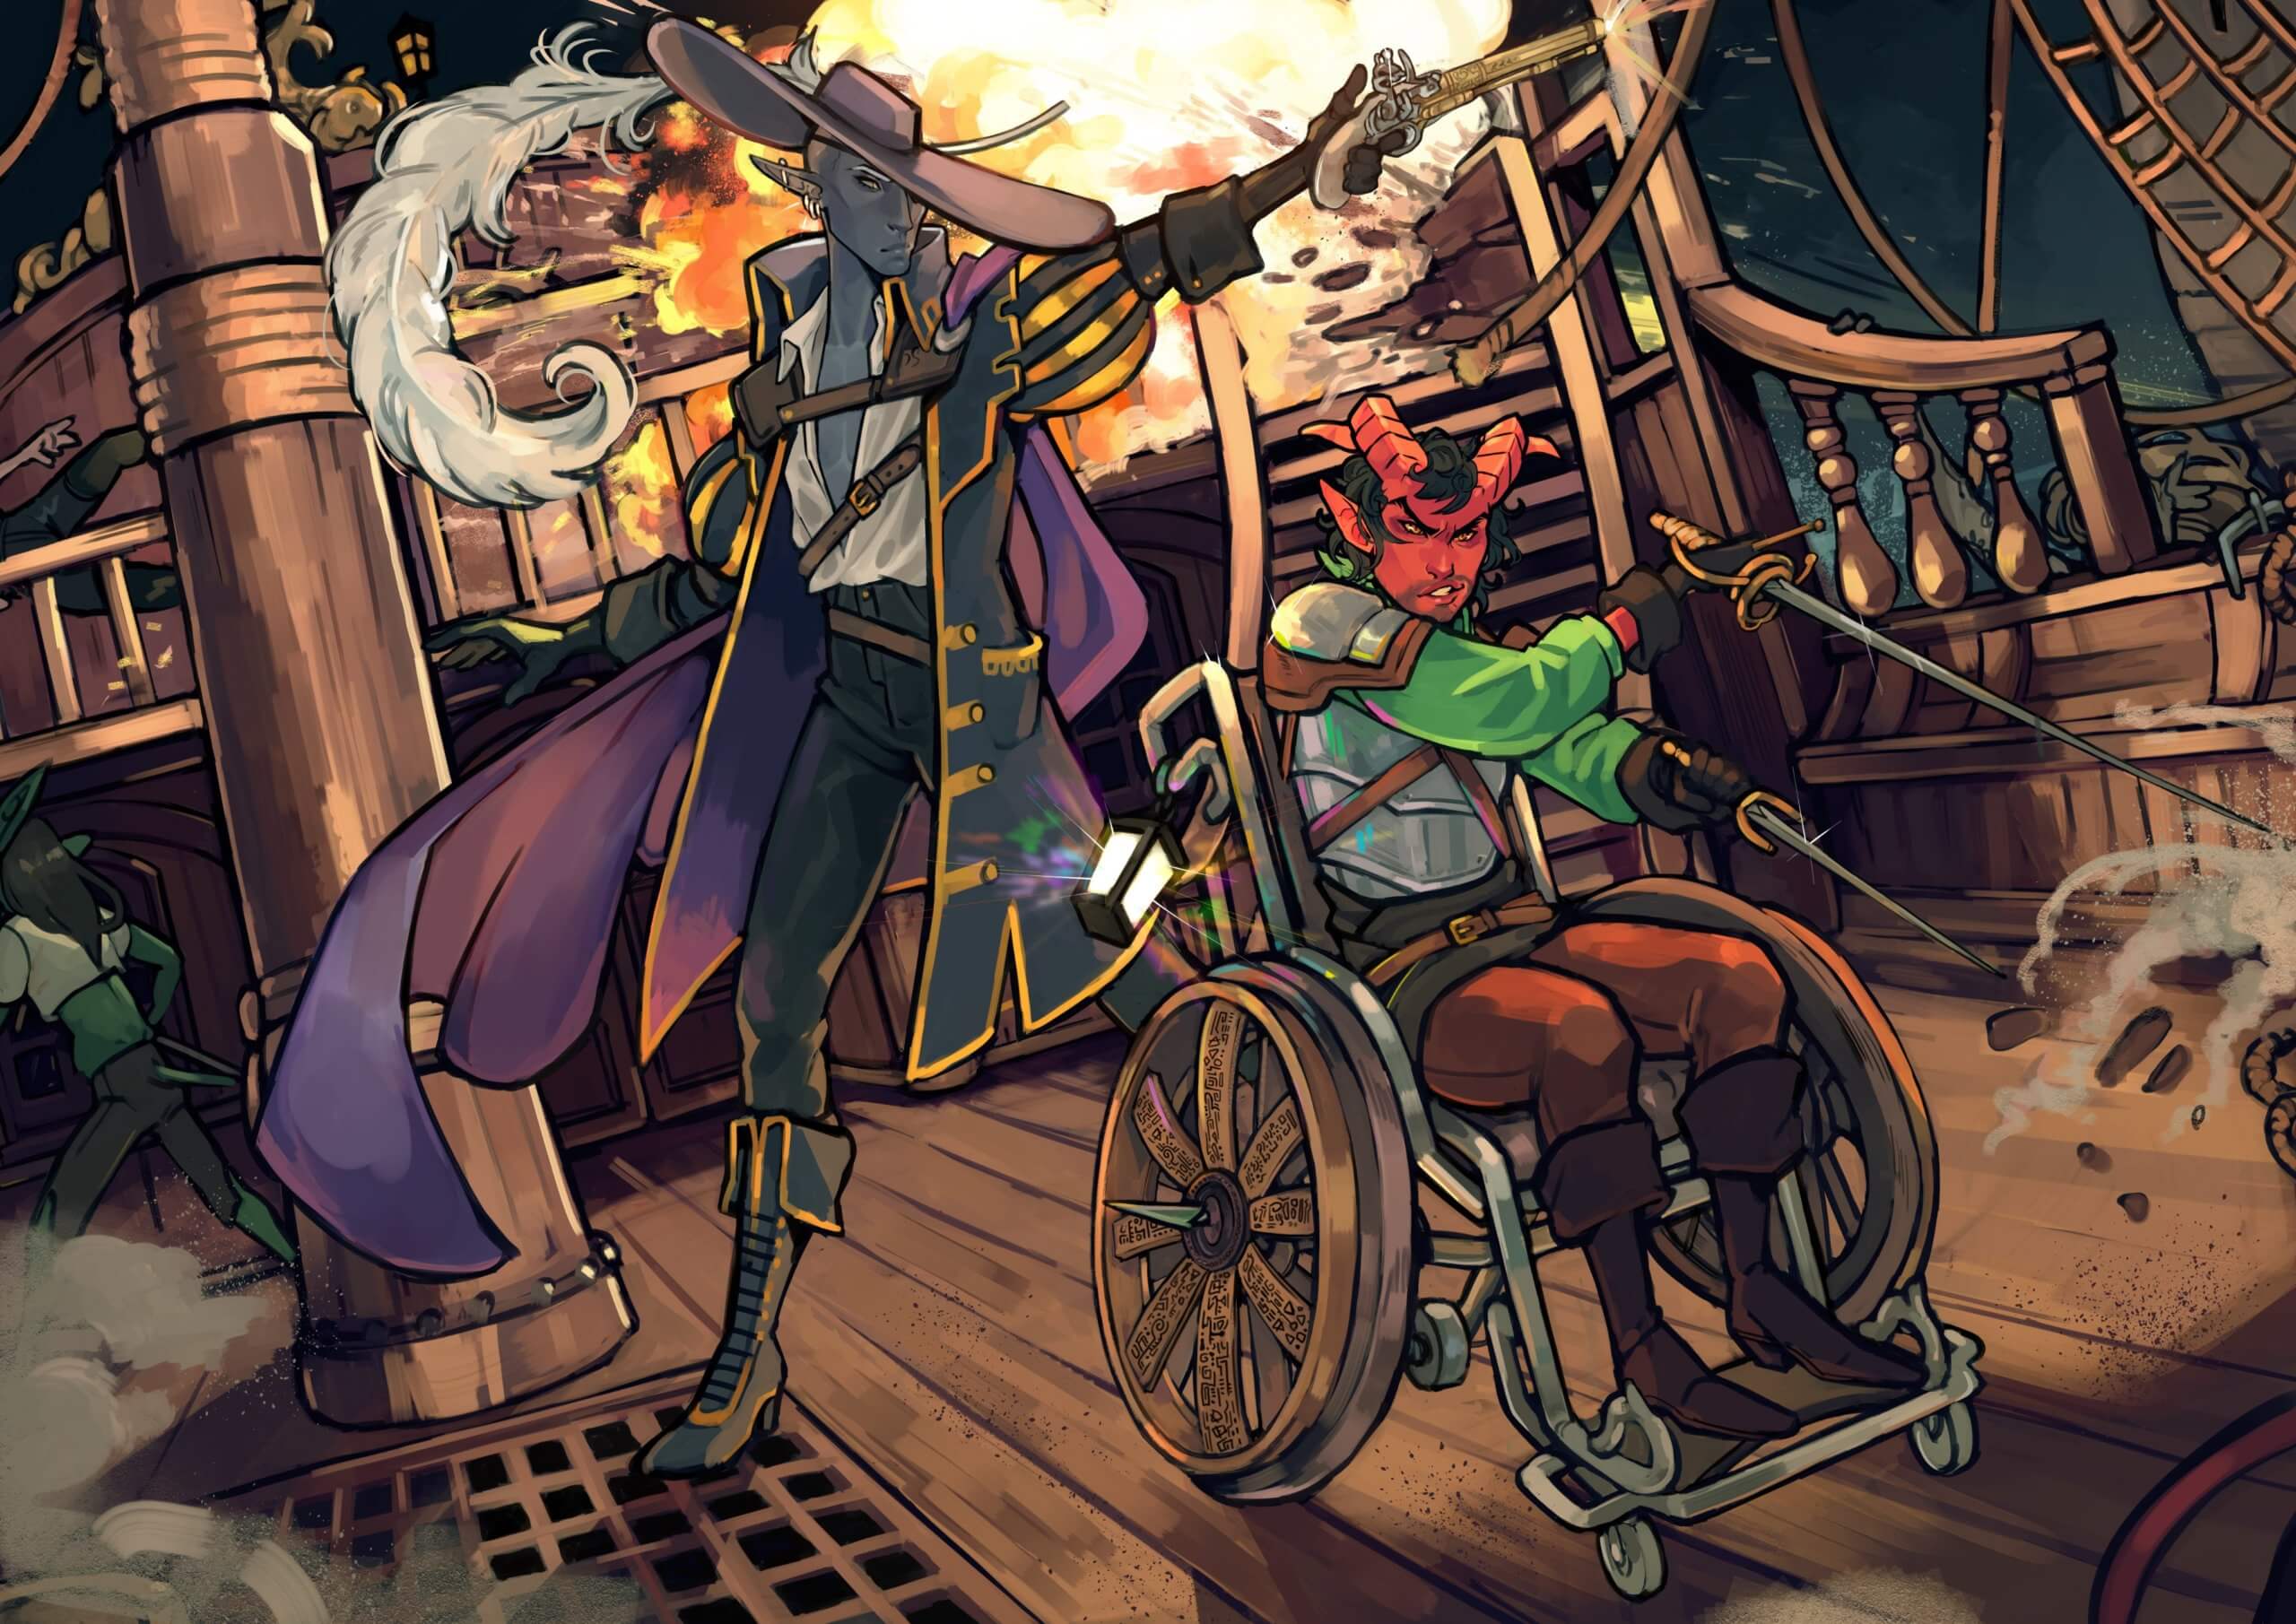 A tiefling with a rapier and dagger in a wheelchair, with a gray elf firing a pistol, both on the deck of a ship with an explosion in the background.